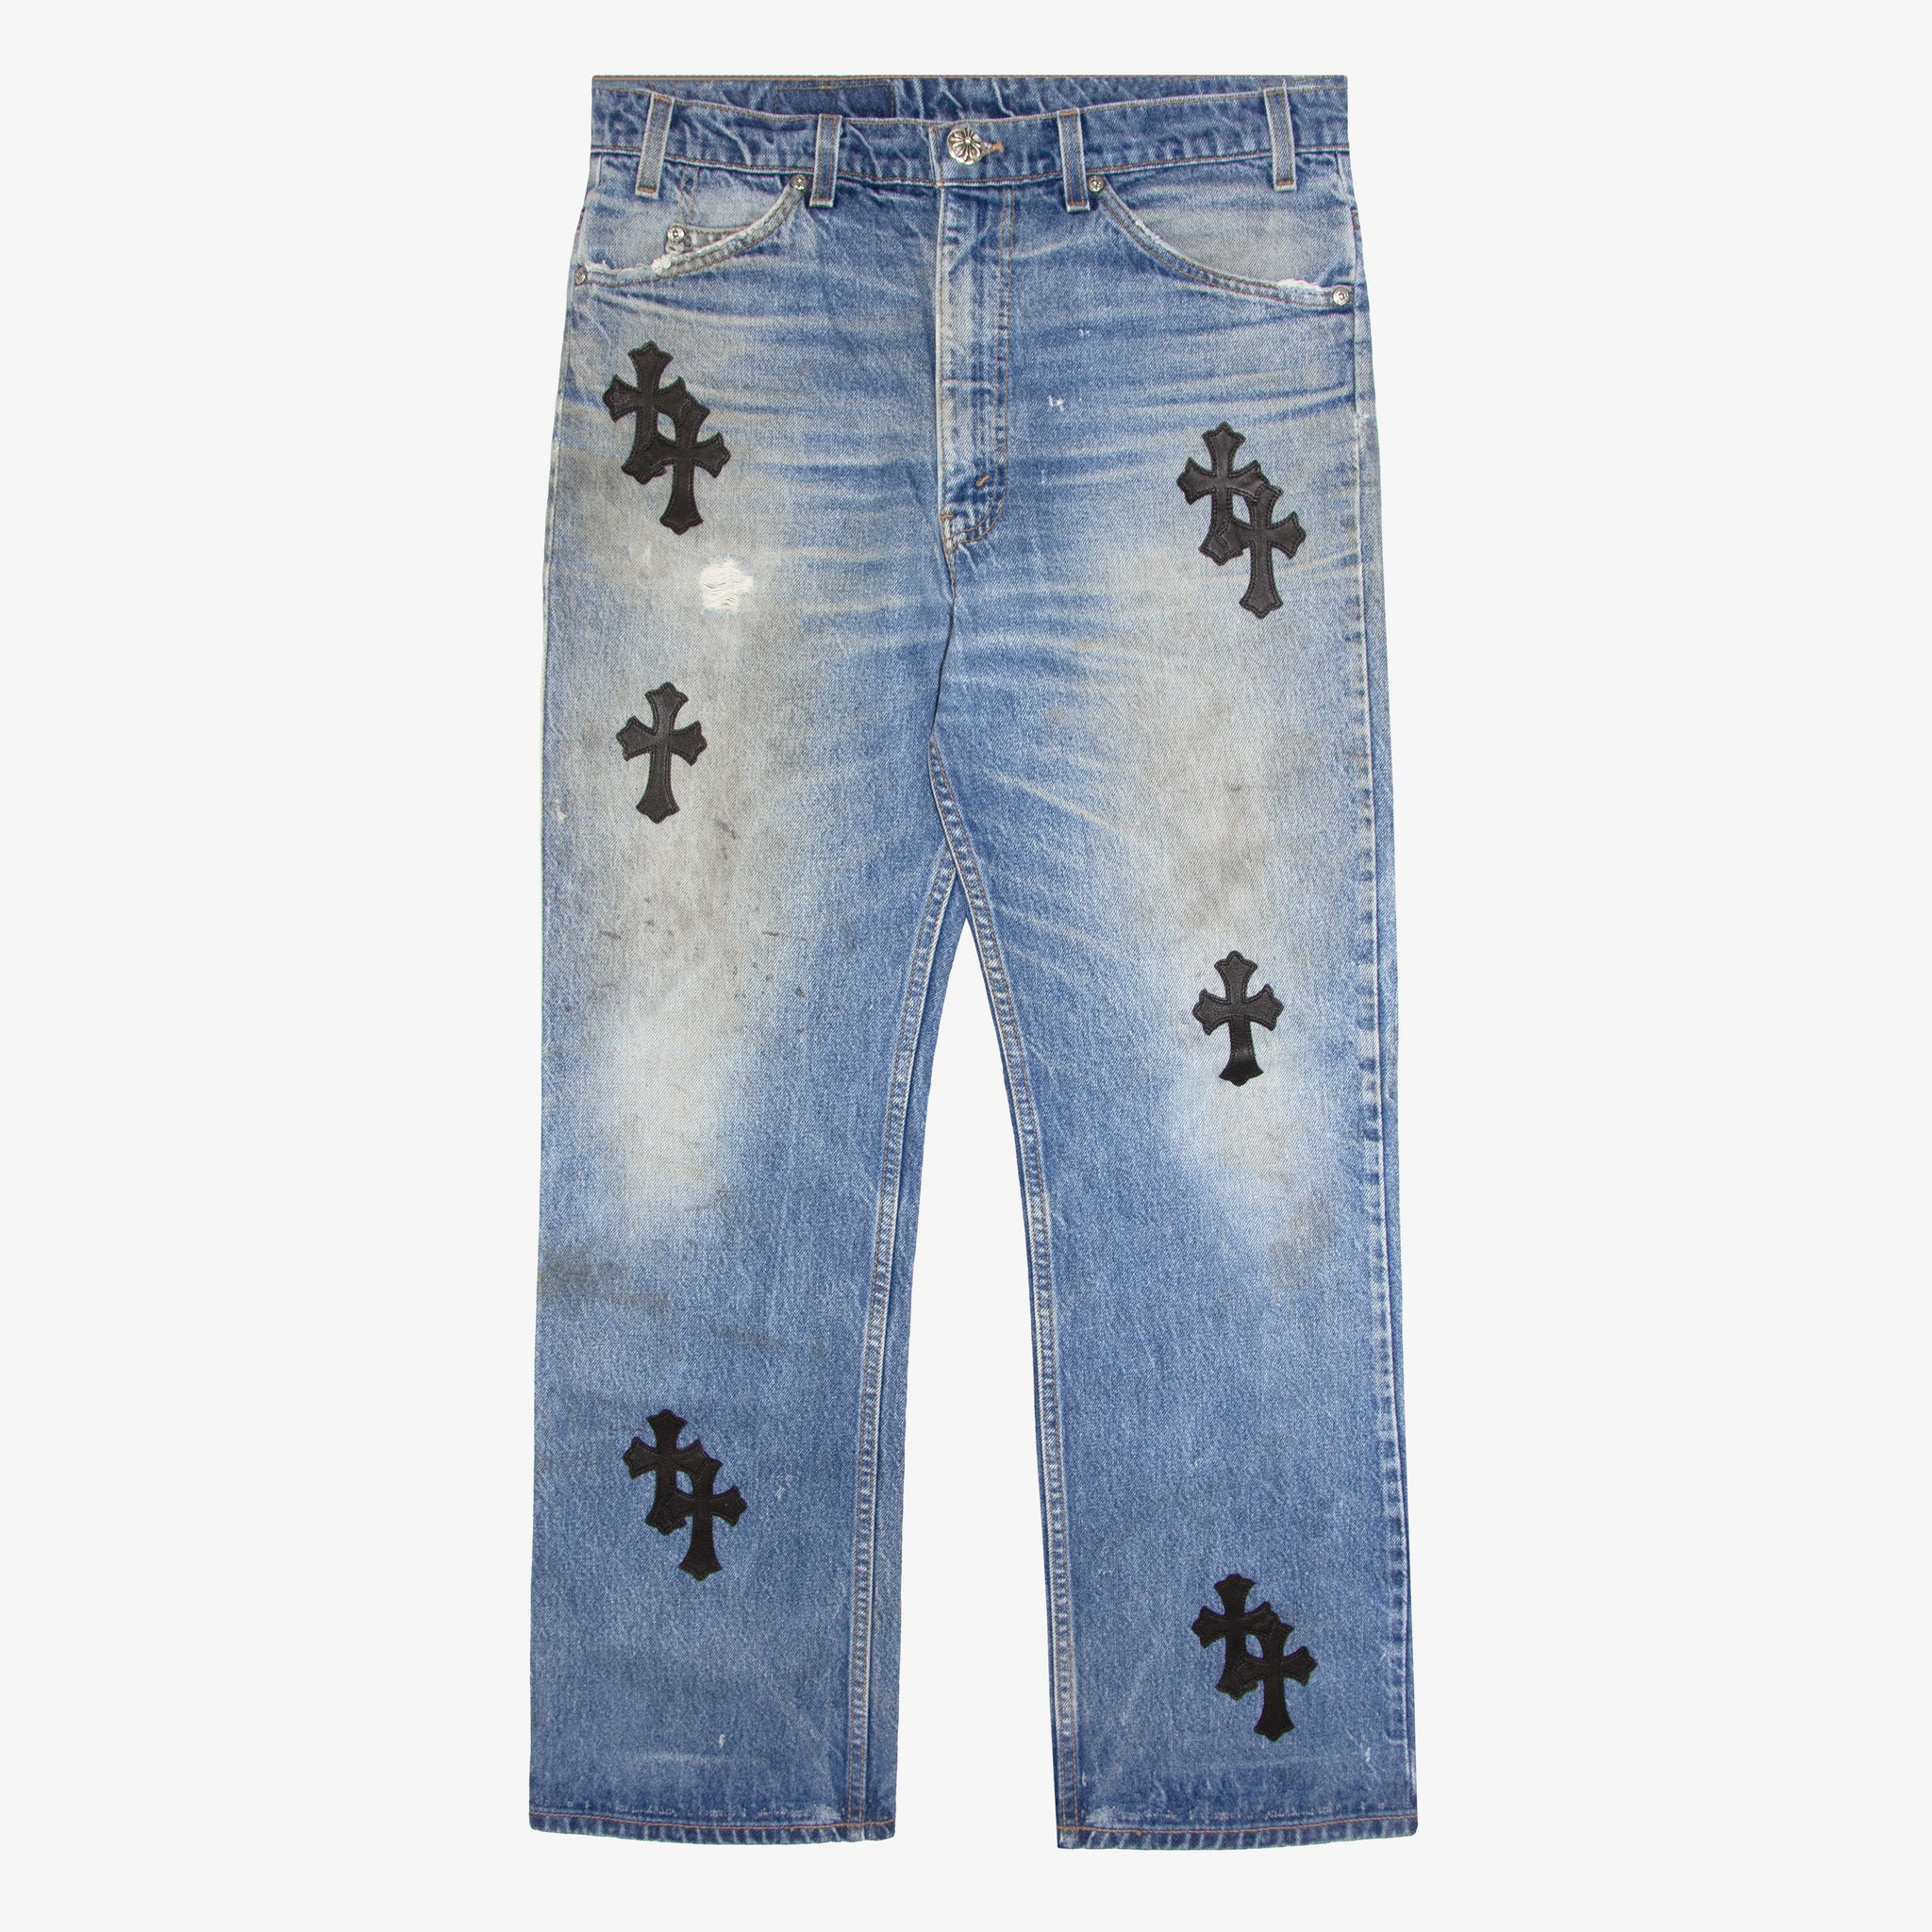 Leather Cross Patch Jeans